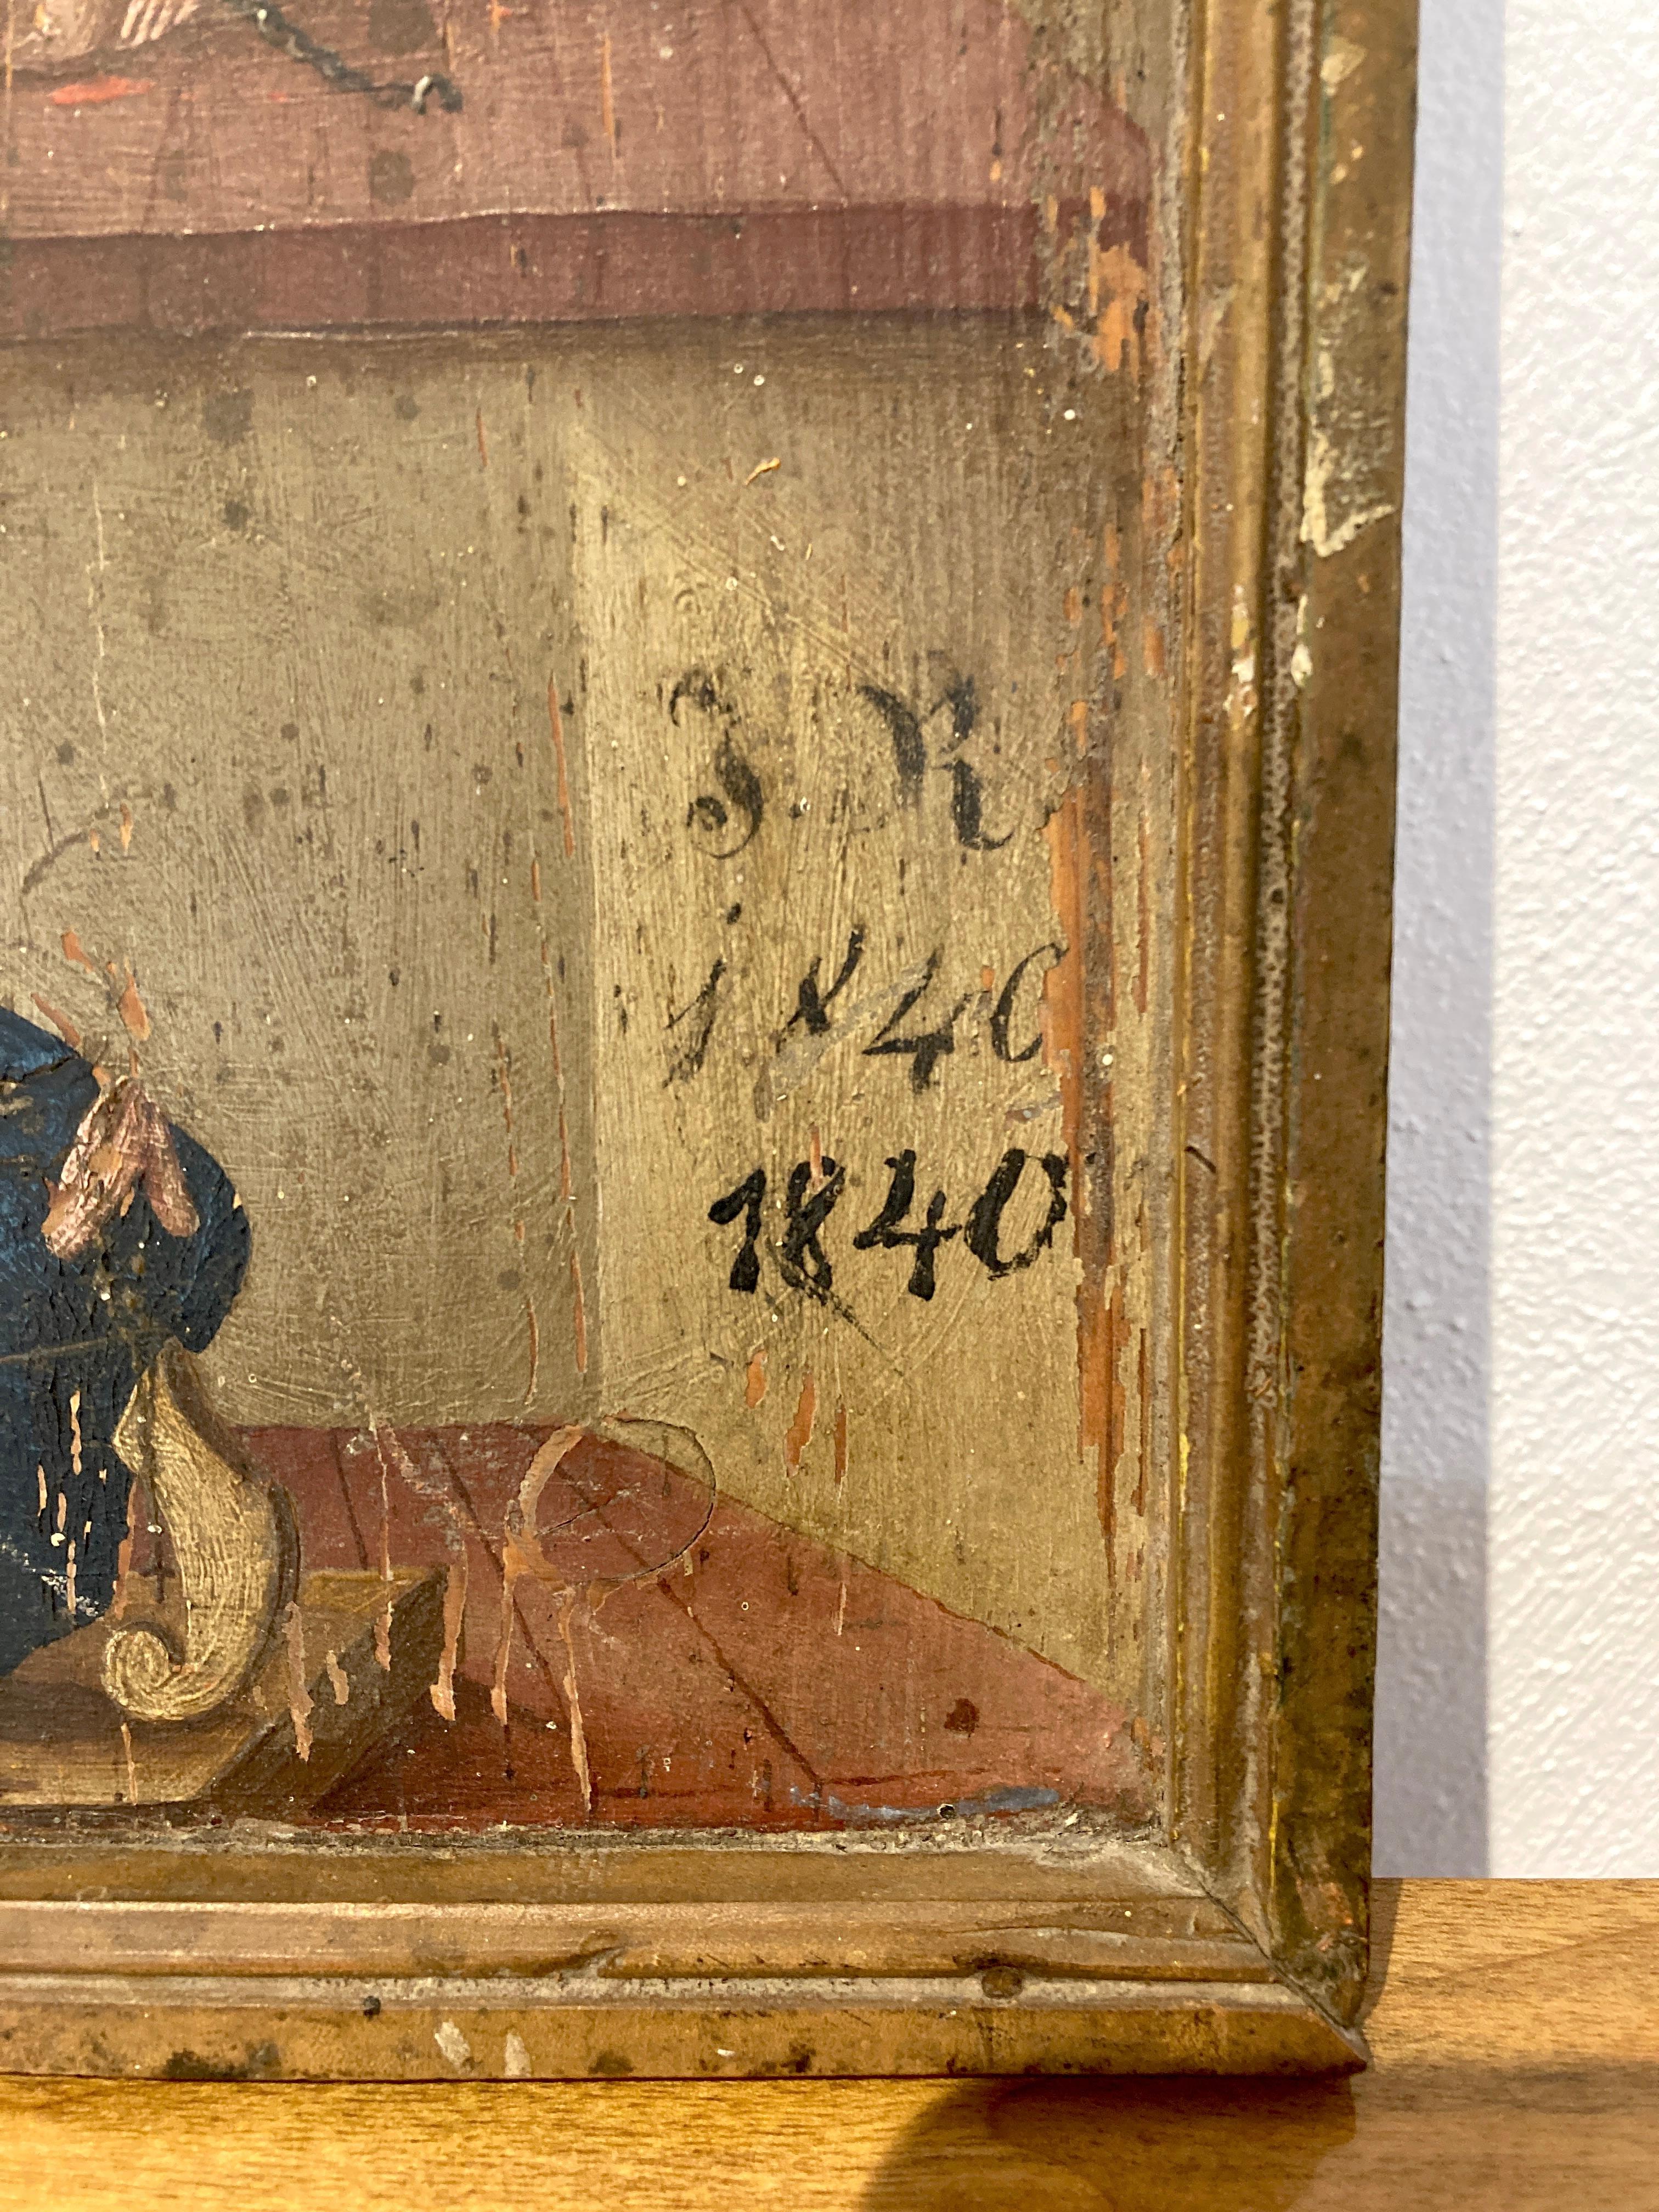 Bavarian Votiv Tablet 19th century.
Jesus at the scourge pillar, Oil on wood, dated 1840.
Very nice original condition.